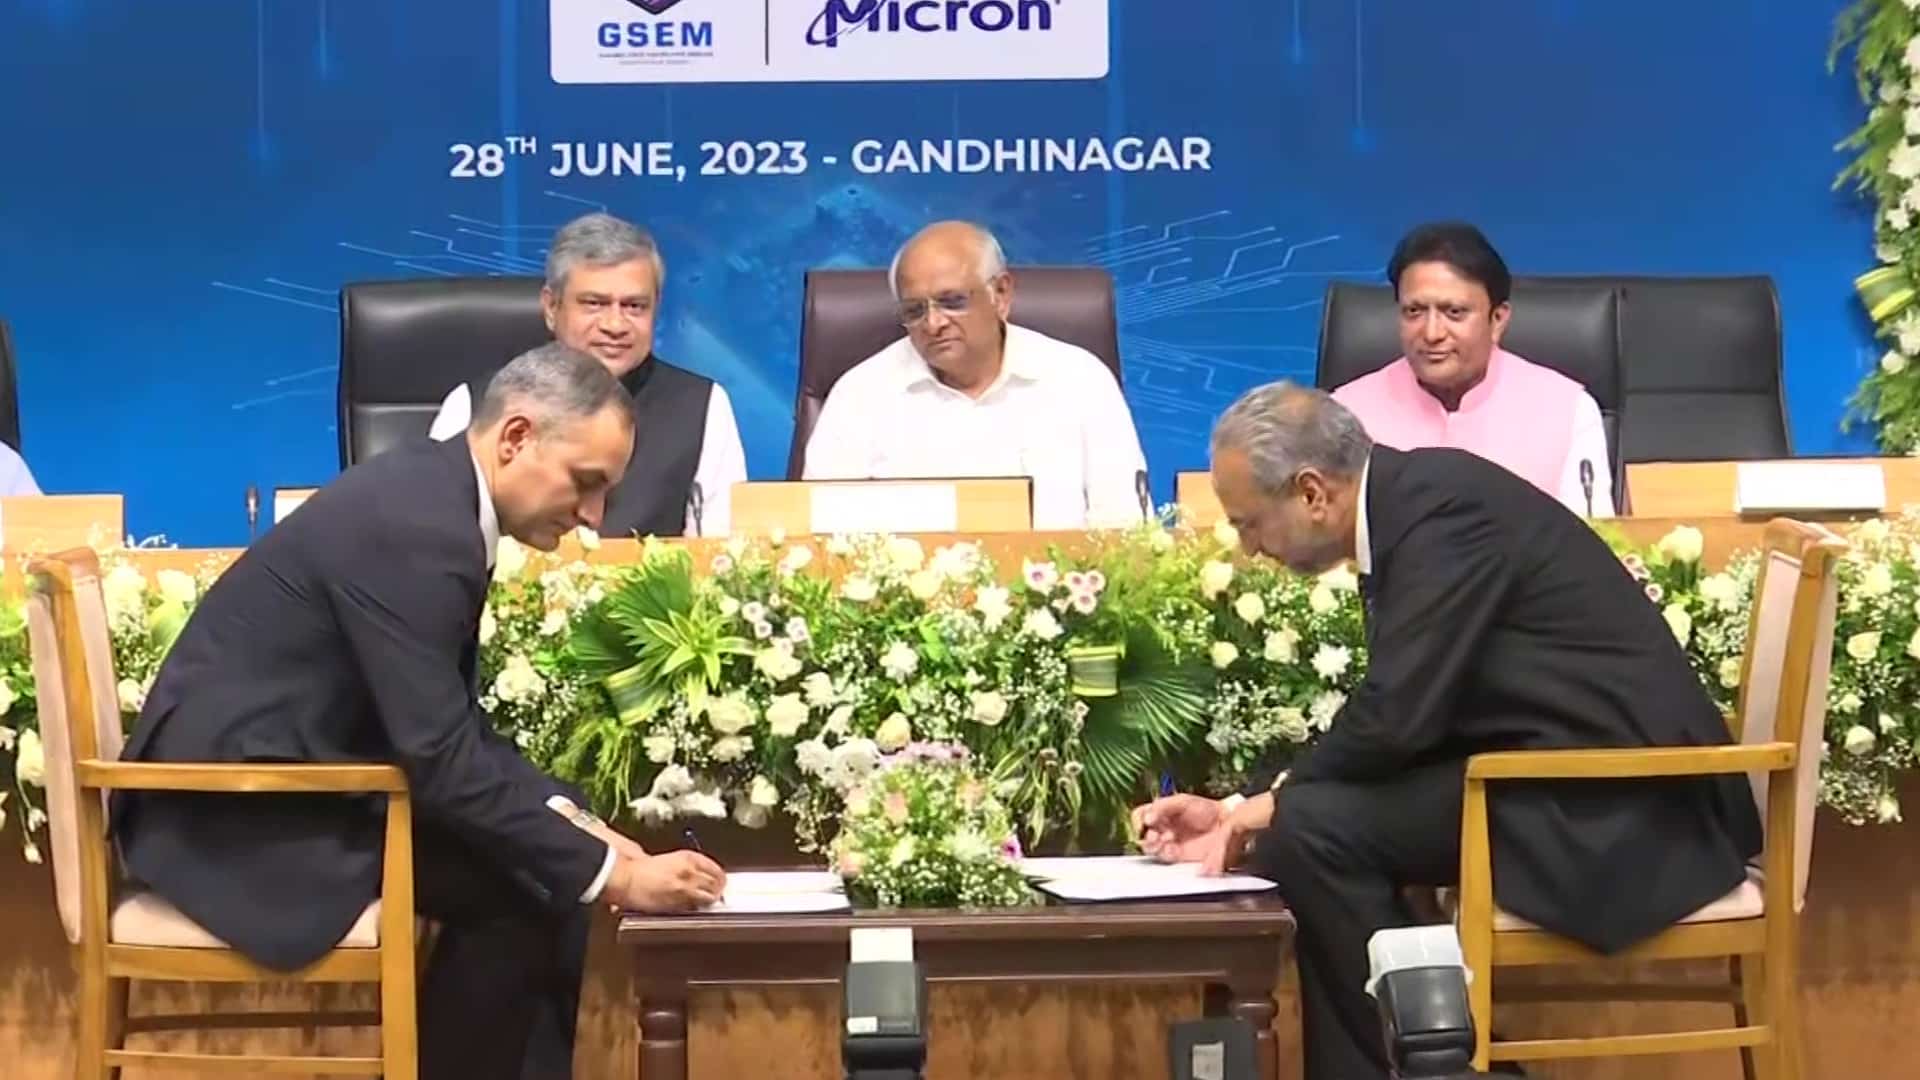 Gujarat signs MoU with US chip maker Micron for semiconductor plant, `first in India'